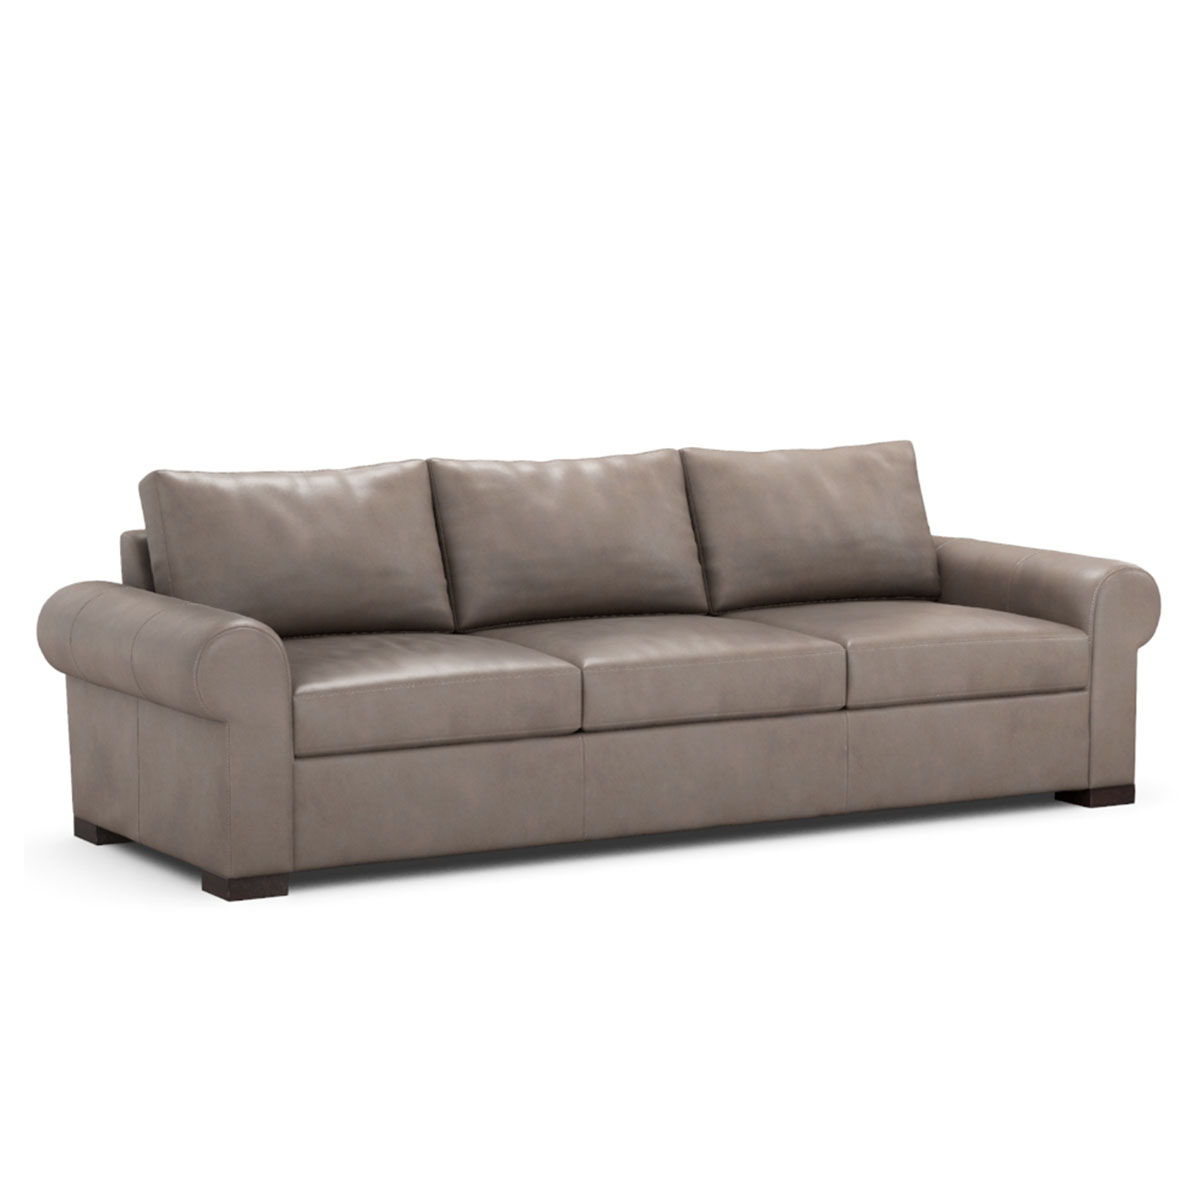 Classic Custom - Rivera Large Sofa With Roll Arm Old Attic Leather - Rocky Step